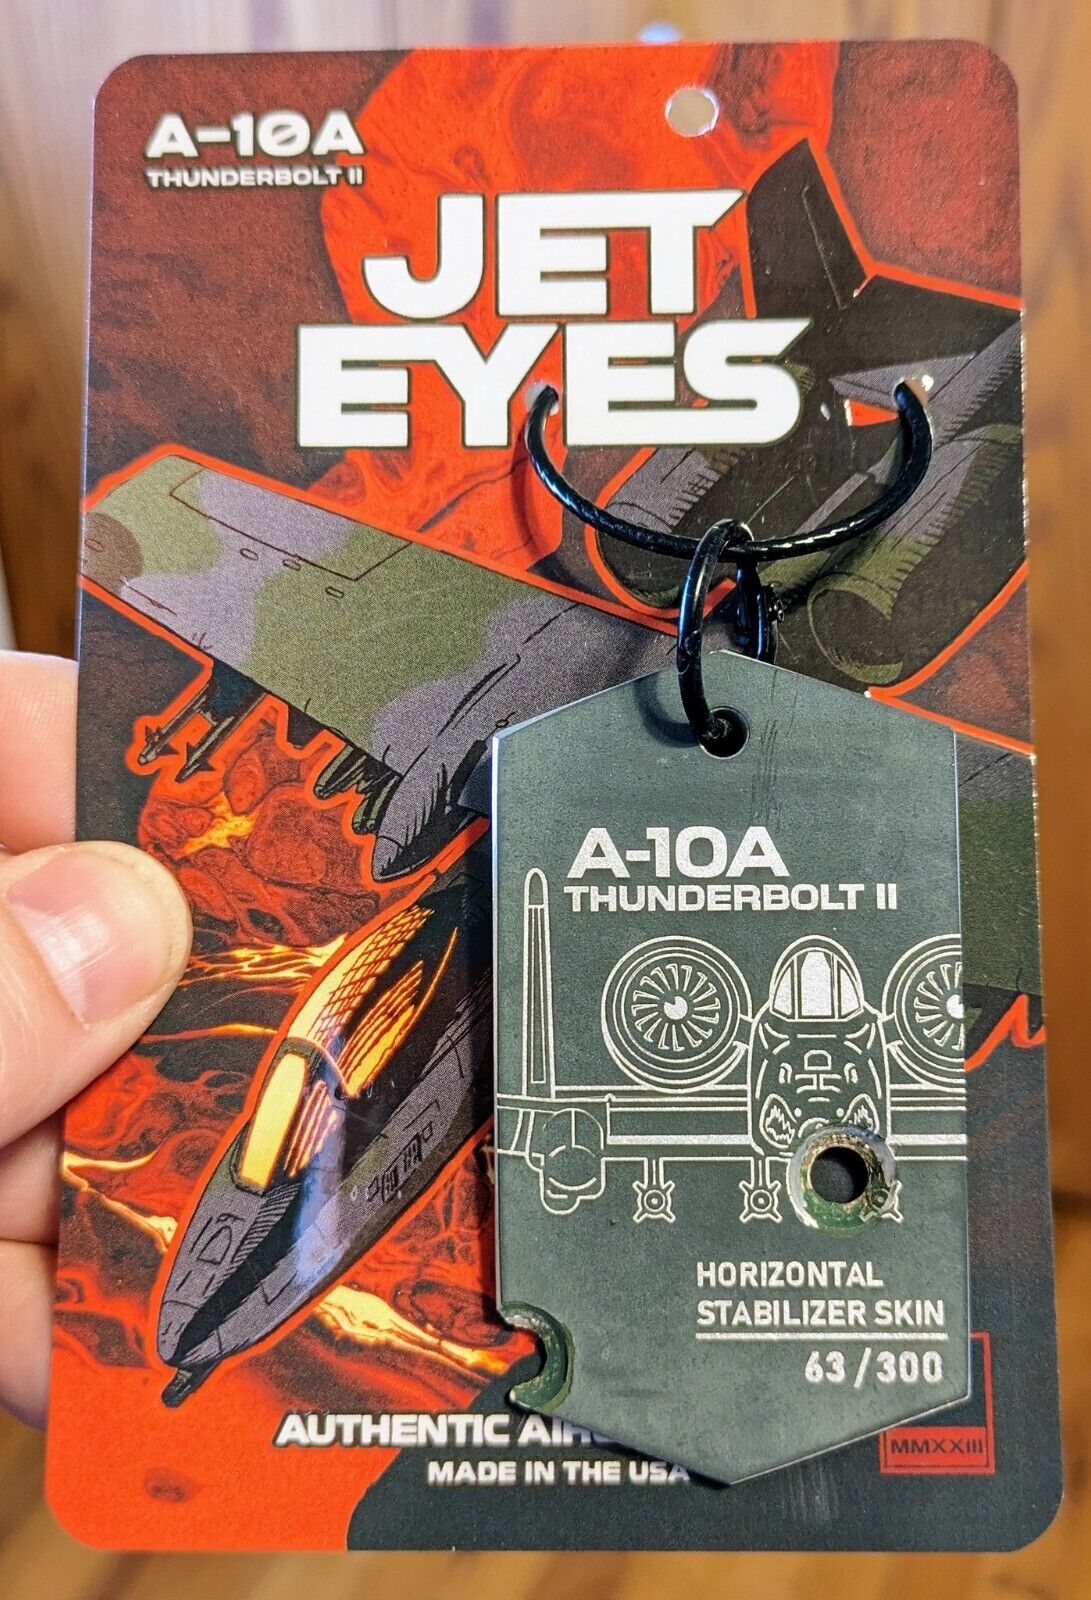 Jet Eyes A-10A Thunderbolt II Tag Horizontal Stab Skin Rivet Plane Tag SOLD OUT